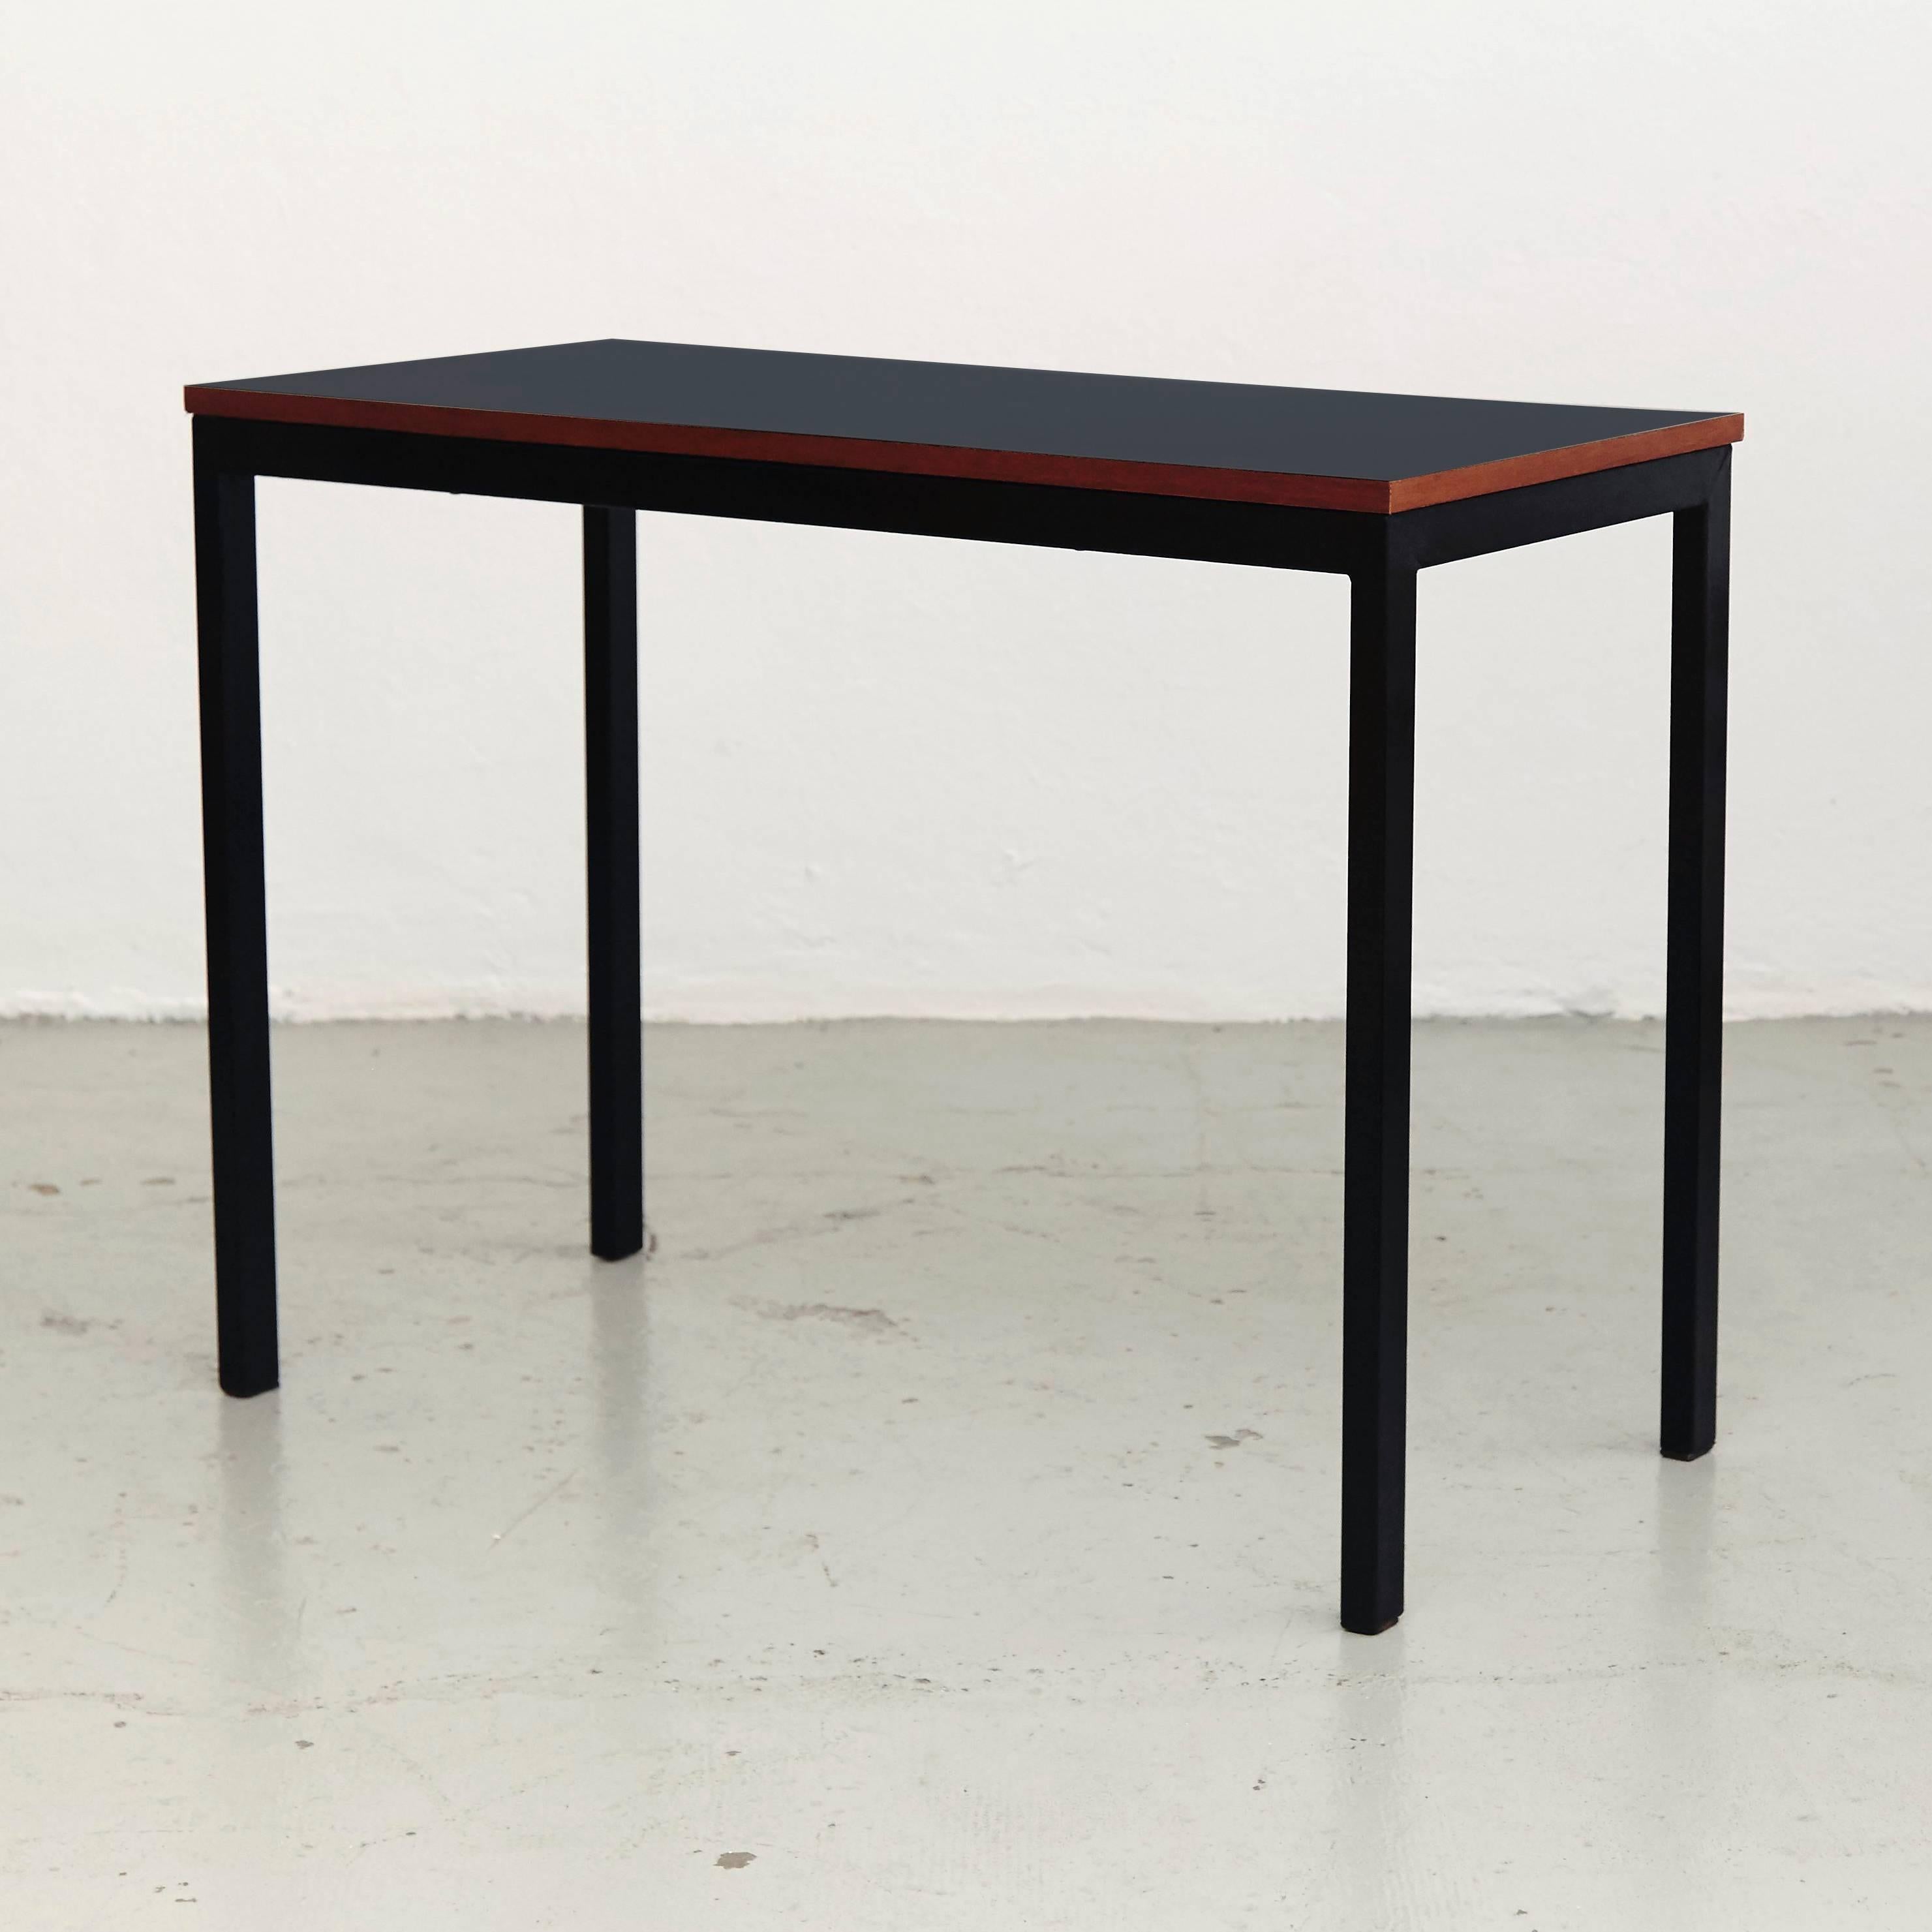 Console designed by Charlotte Perriand, circa 1958.
Manufactured in France, circa 1958.
Laminated plastic-covered plywood, painted steel. 
Black.

In good original condition, with minor wear consistent with age and use, preserving a beautiful